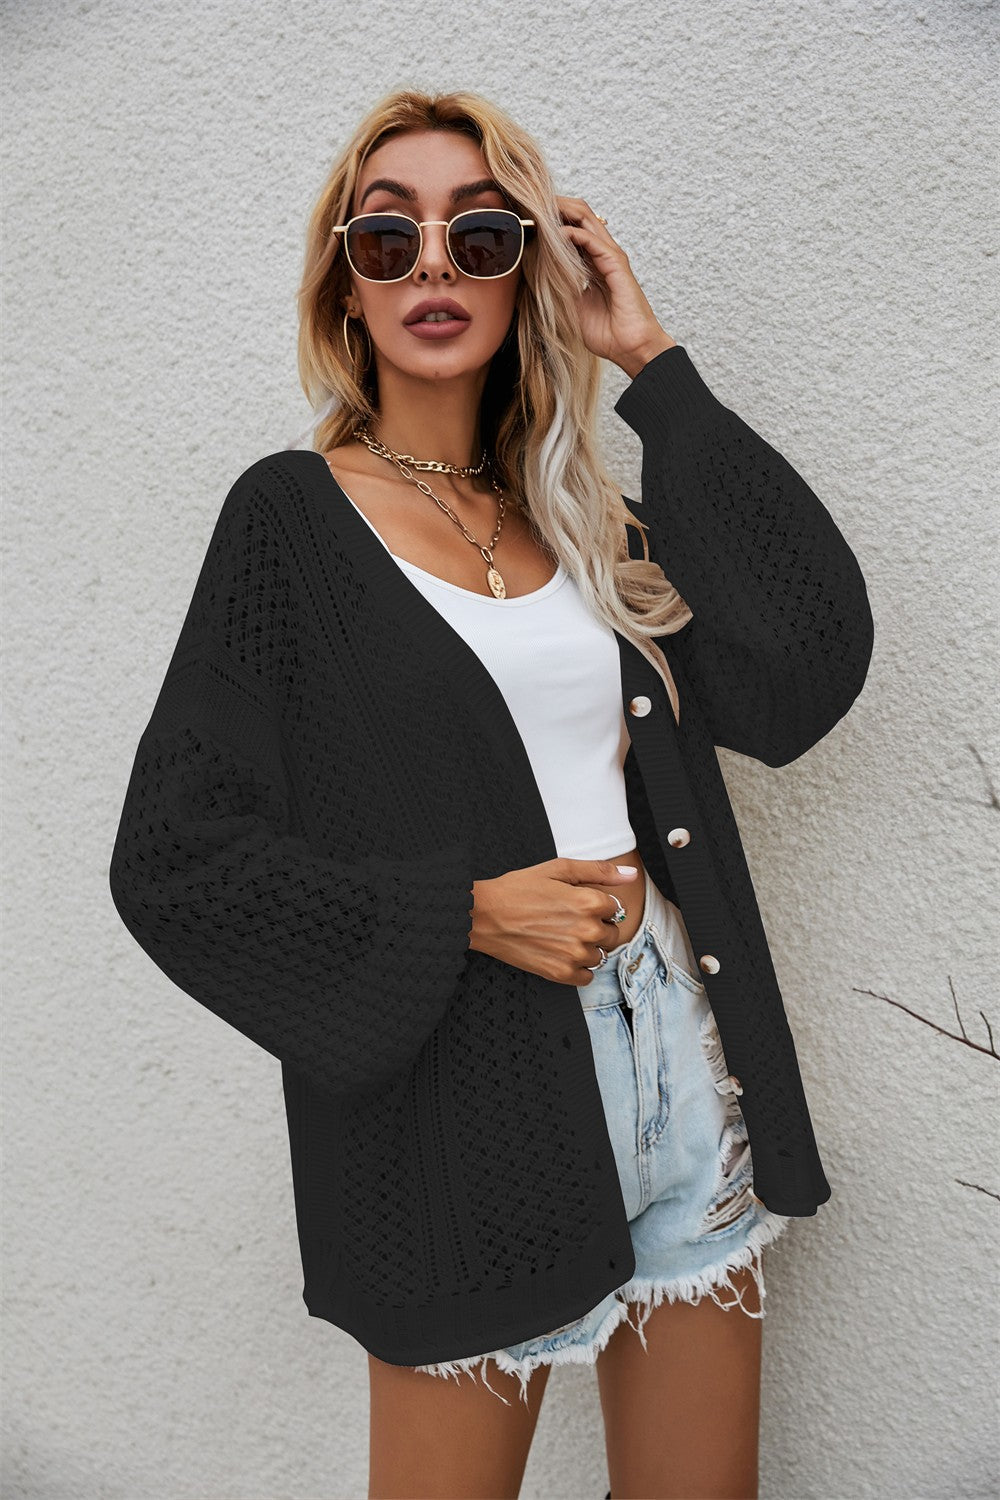 Openwork V-Neck Dropped Shoulder Cardigan - Women’s Clothing & Accessories - Shirts & Tops - 14 - 2024